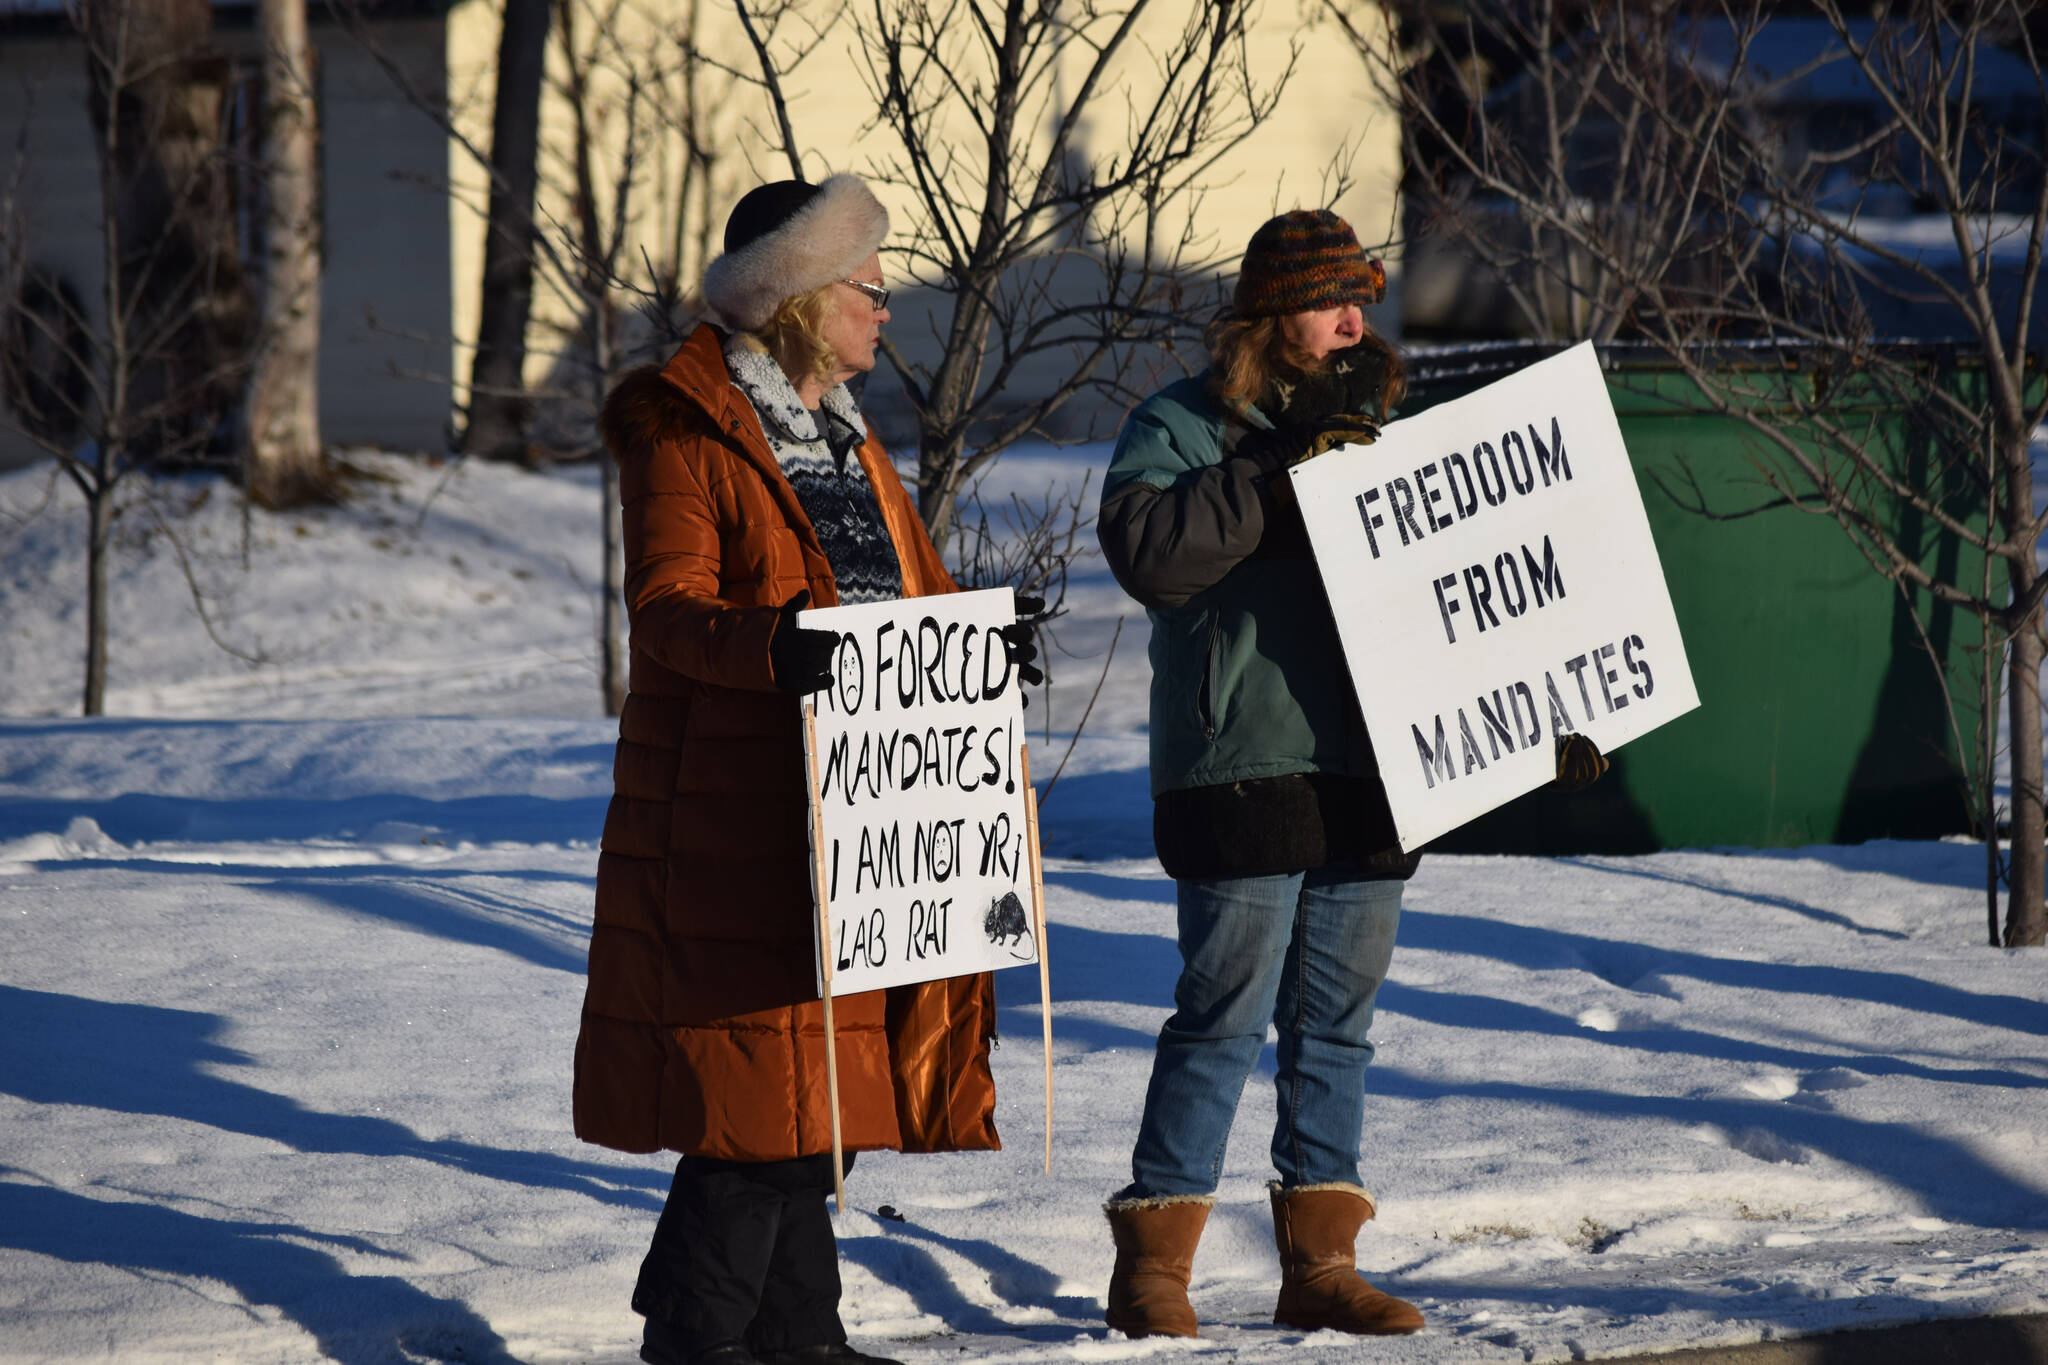 Demonstrators gather outside of Central Peninsula Hospital in Soldotna to protest COVID-19 vaccine mandates and advocate for alternative treatments on Saturday, Nov. 20, 2021. (Camille Botello/Peninsula Clarion)